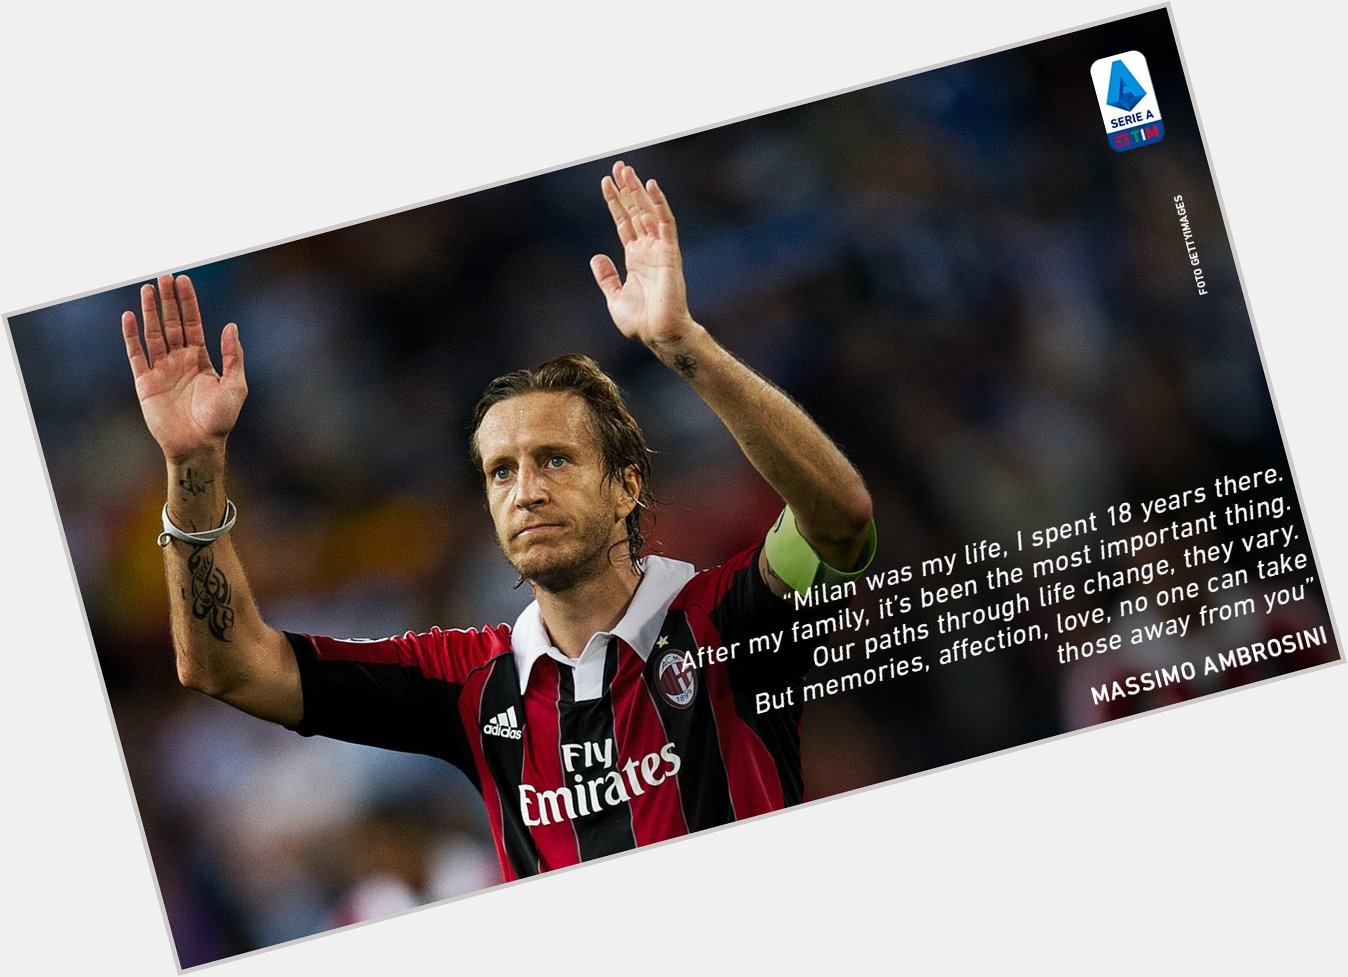 A captain, a fighter who was always ready for his team. Happy birthday Massimo Ambrosini!  